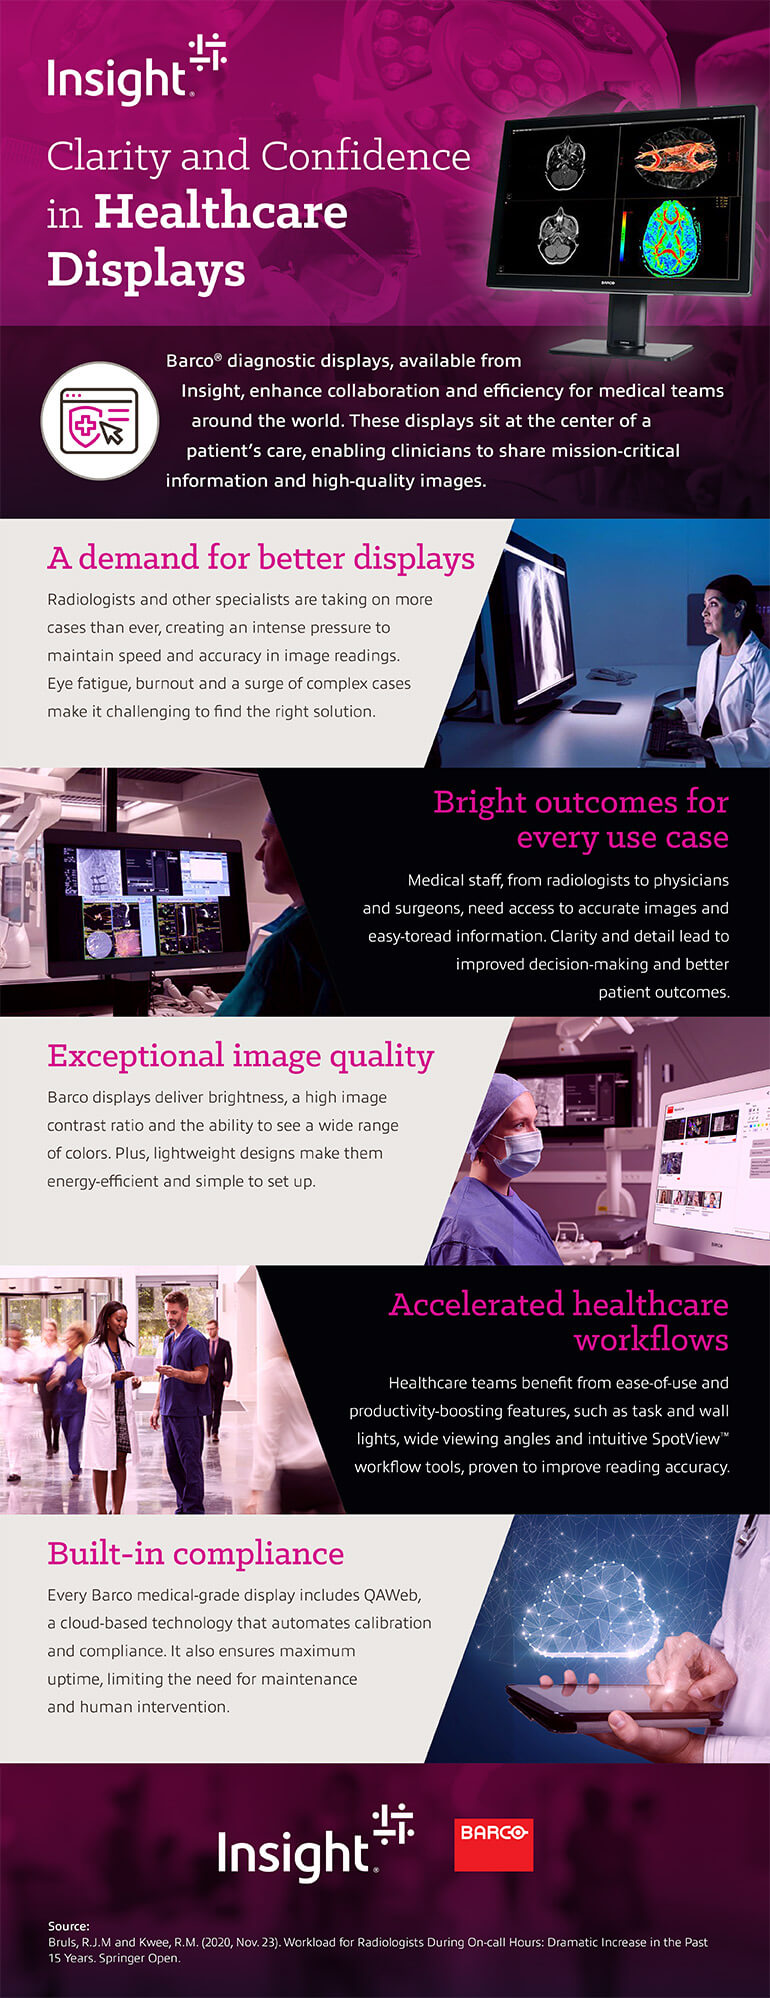 Barco Medical-grade display performance infographic as translated below